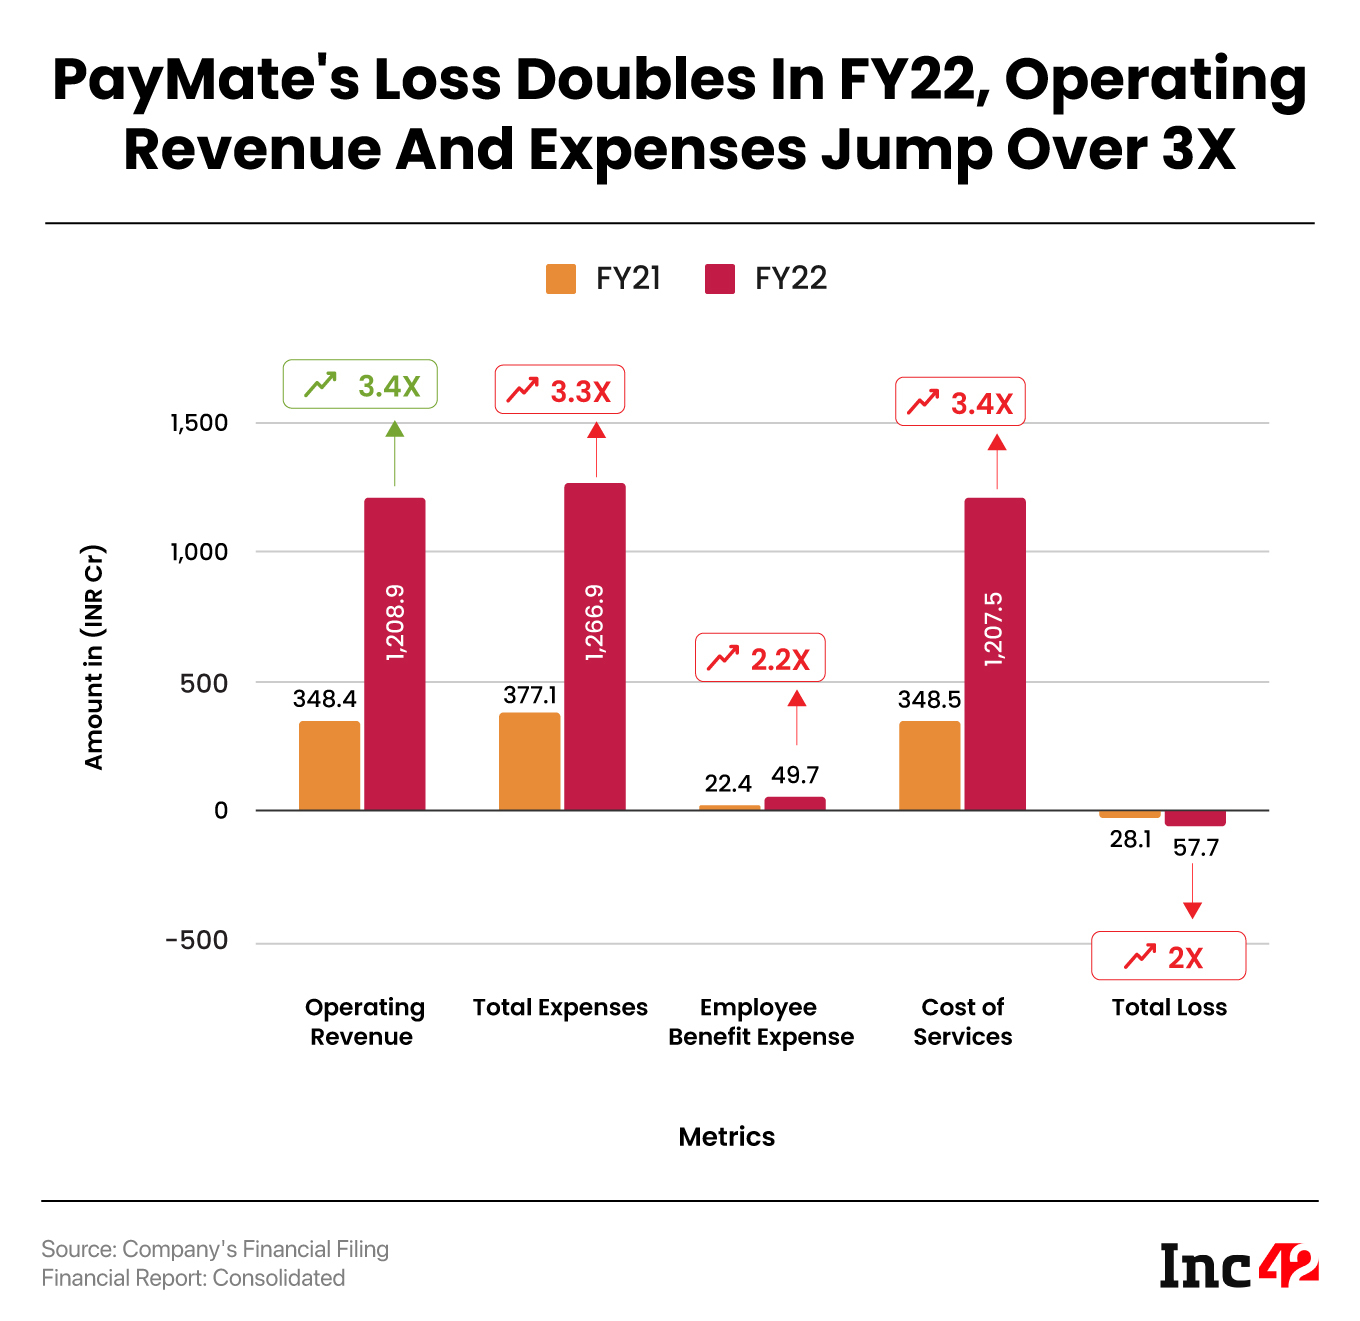 Paymate's loss doubles in fy22